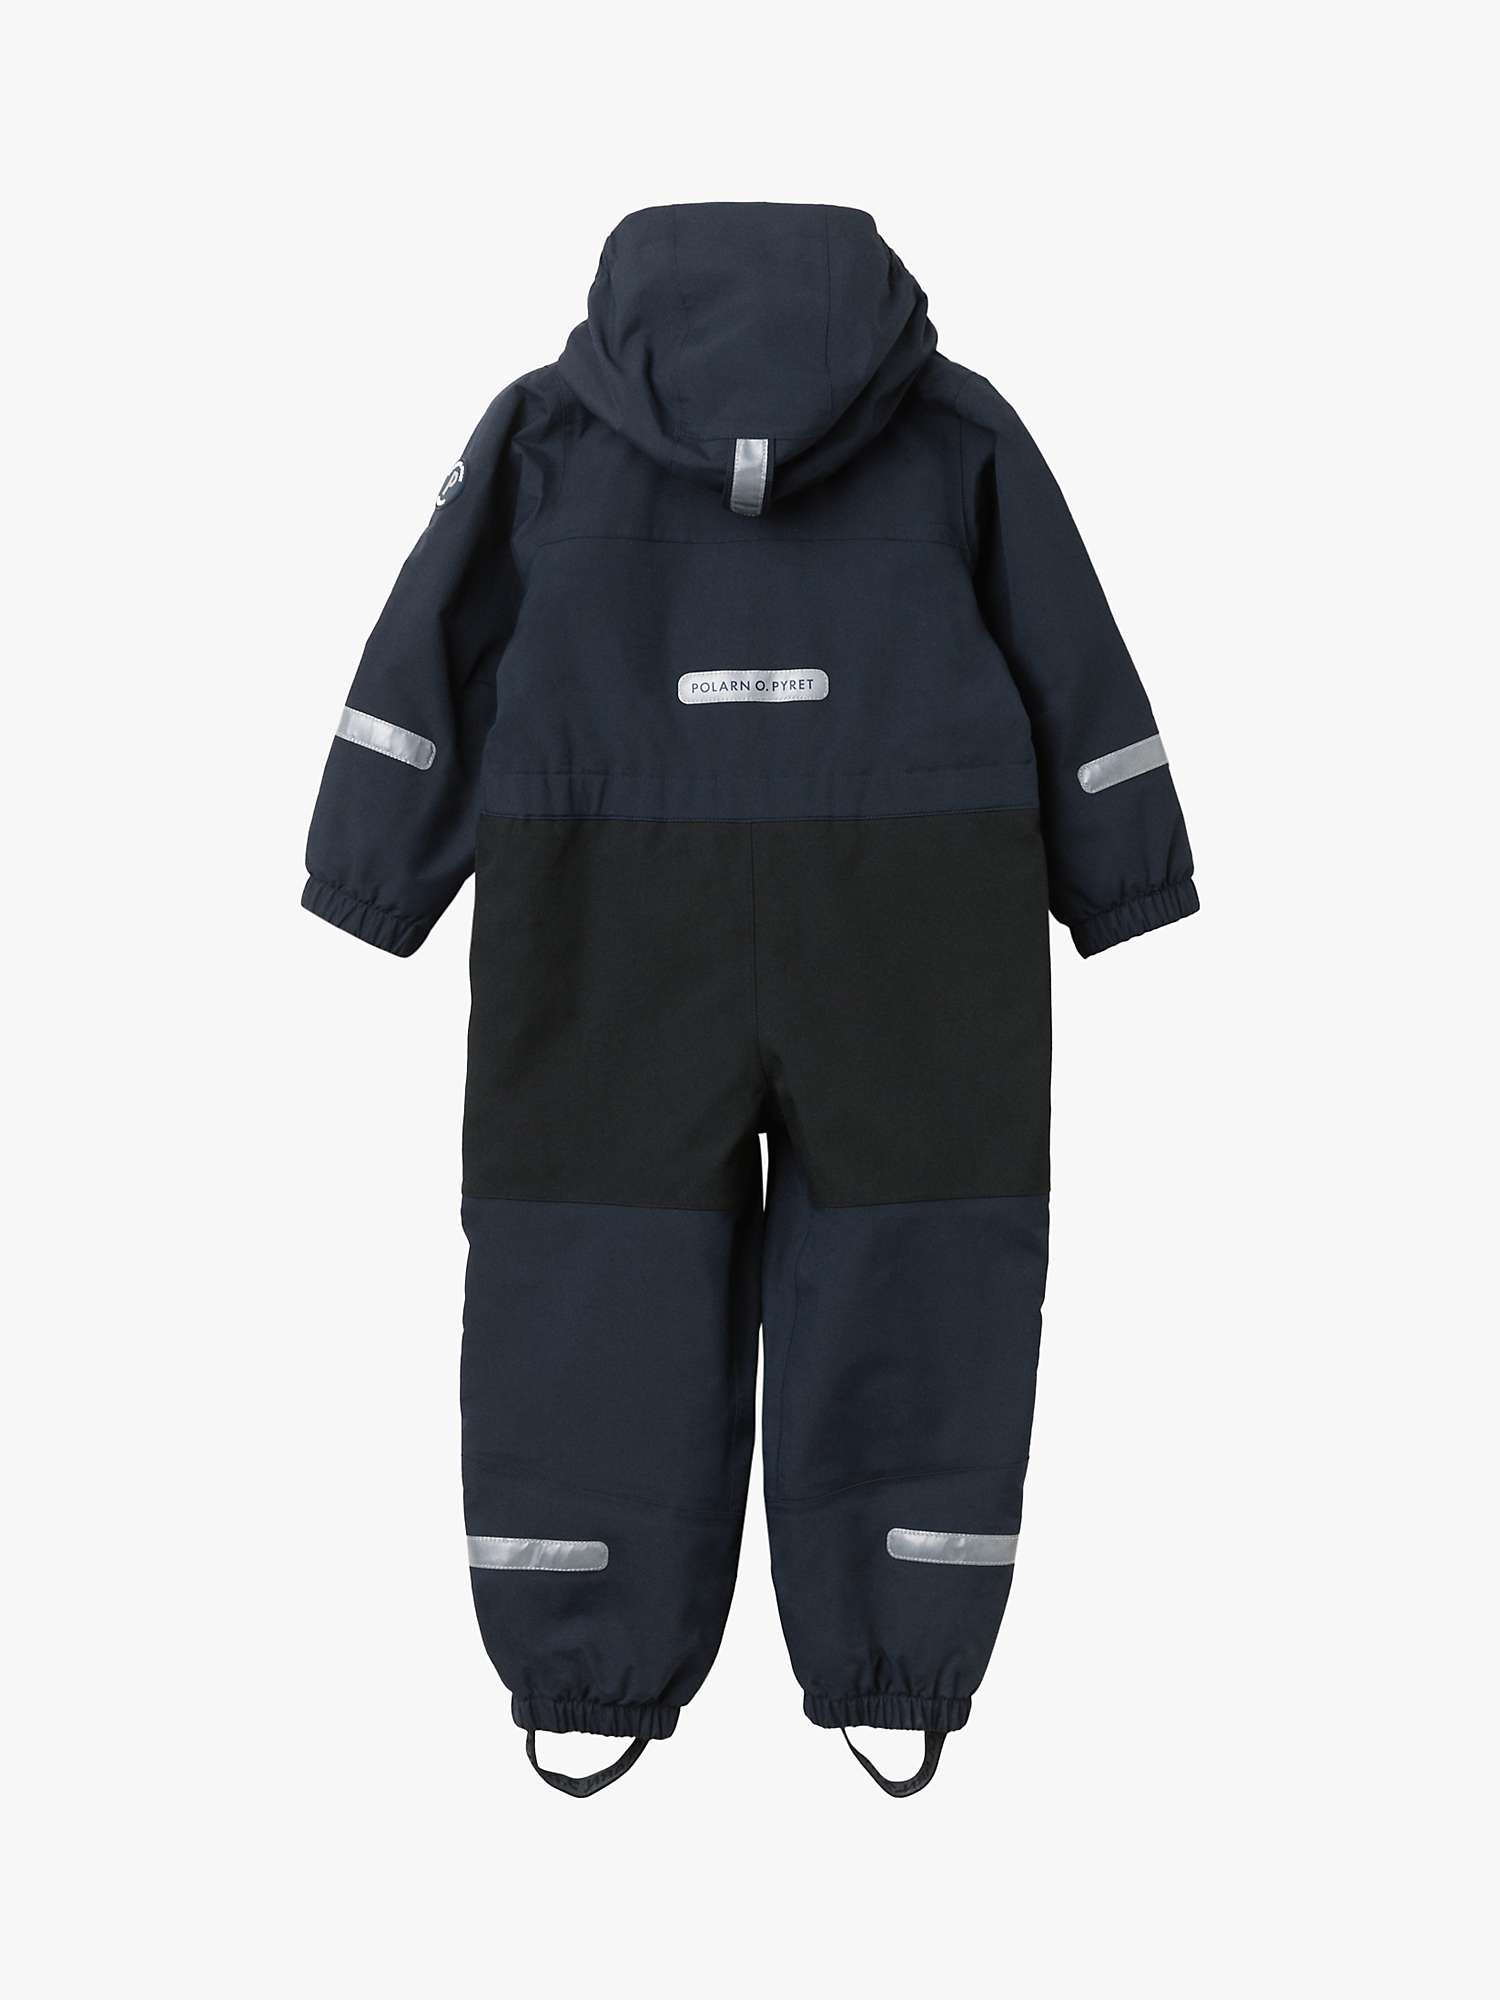 Buy Polarn O. Pyret Kids' Shell Overall, Navy Online at johnlewis.com